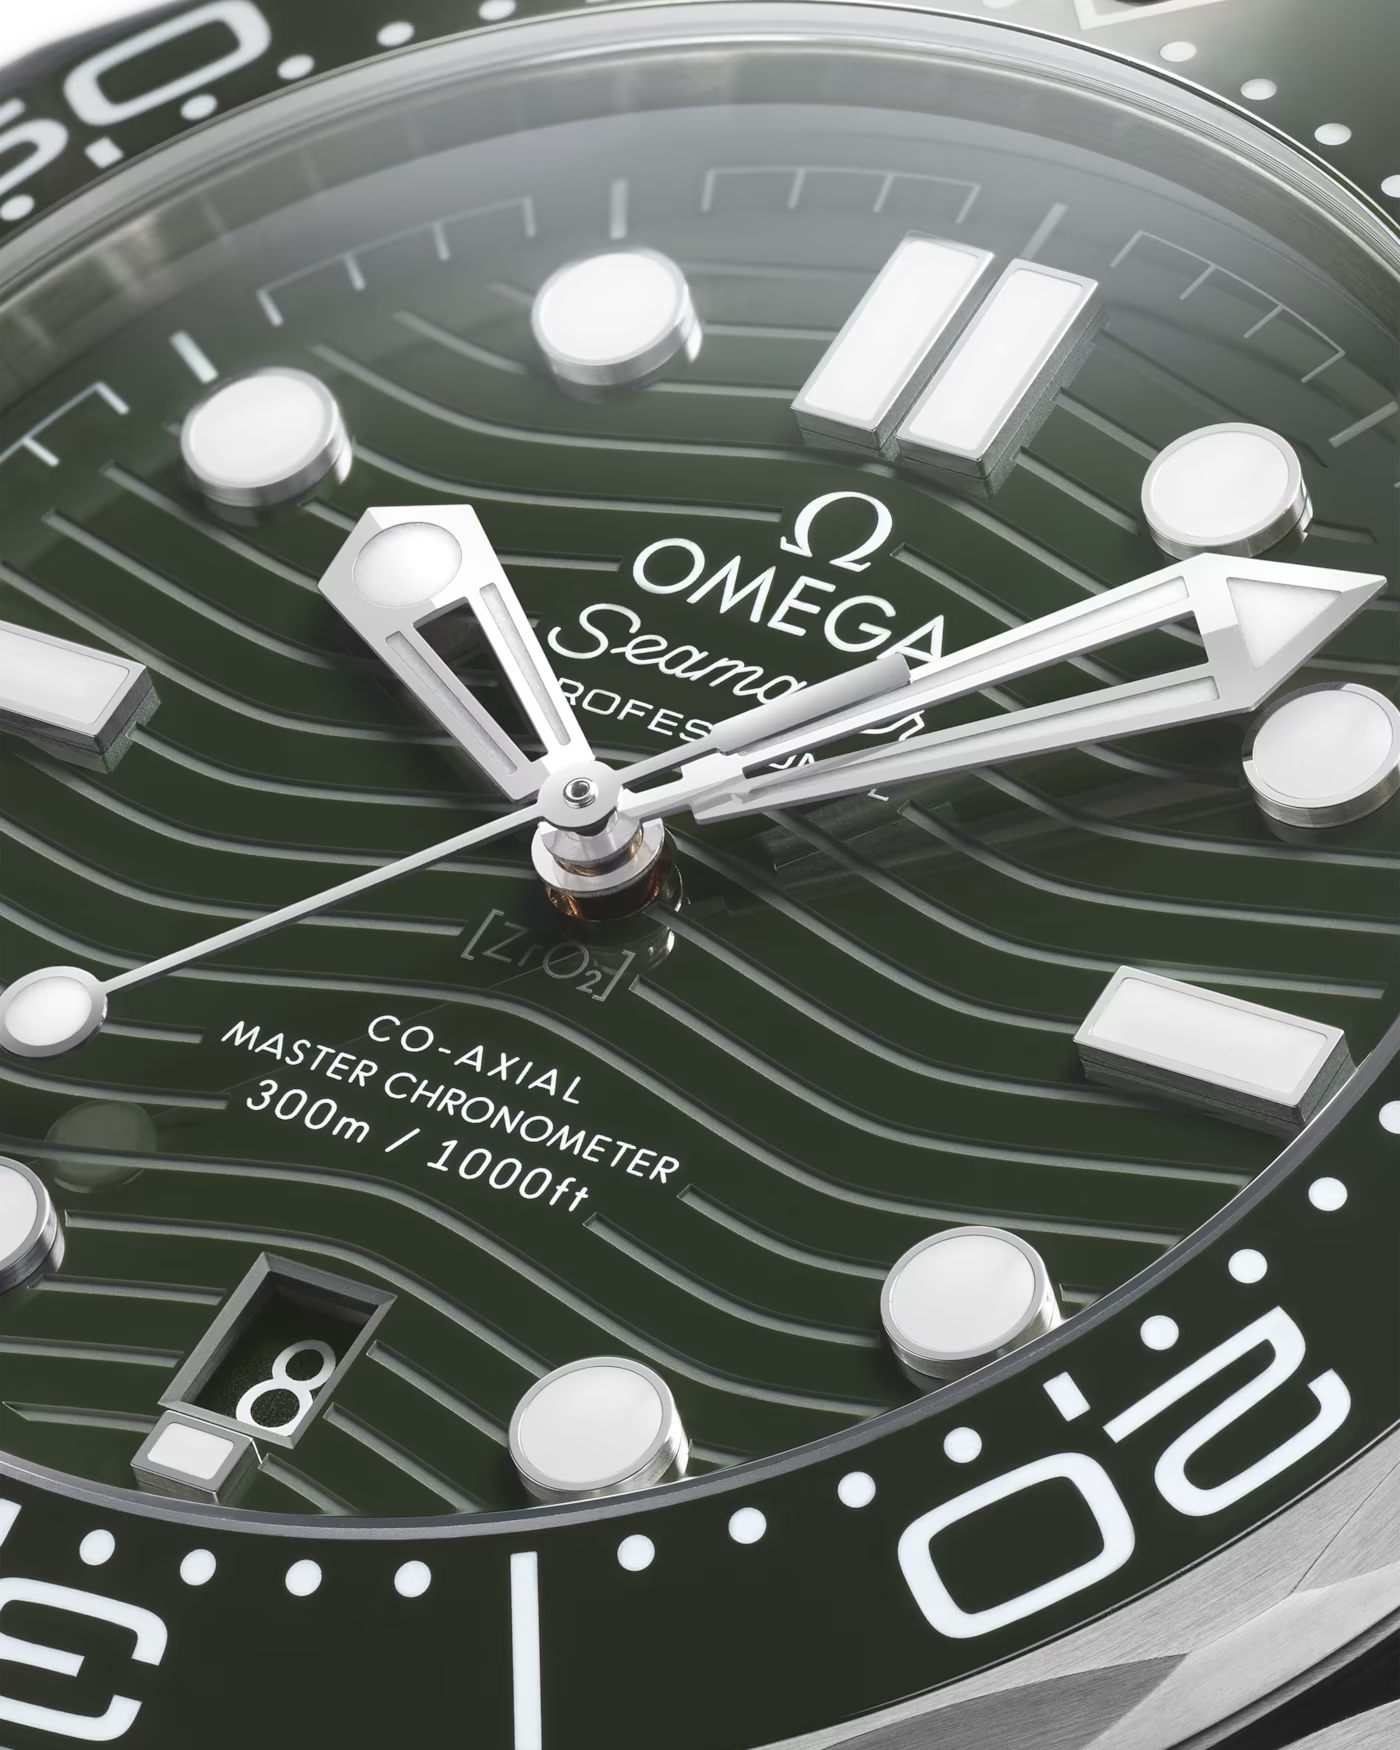 OMEGA-SEAMASTER DIVER 300M CO‑AXIAL MASTER CHRONOMETER 42 MM 210.32.42.20.10.001